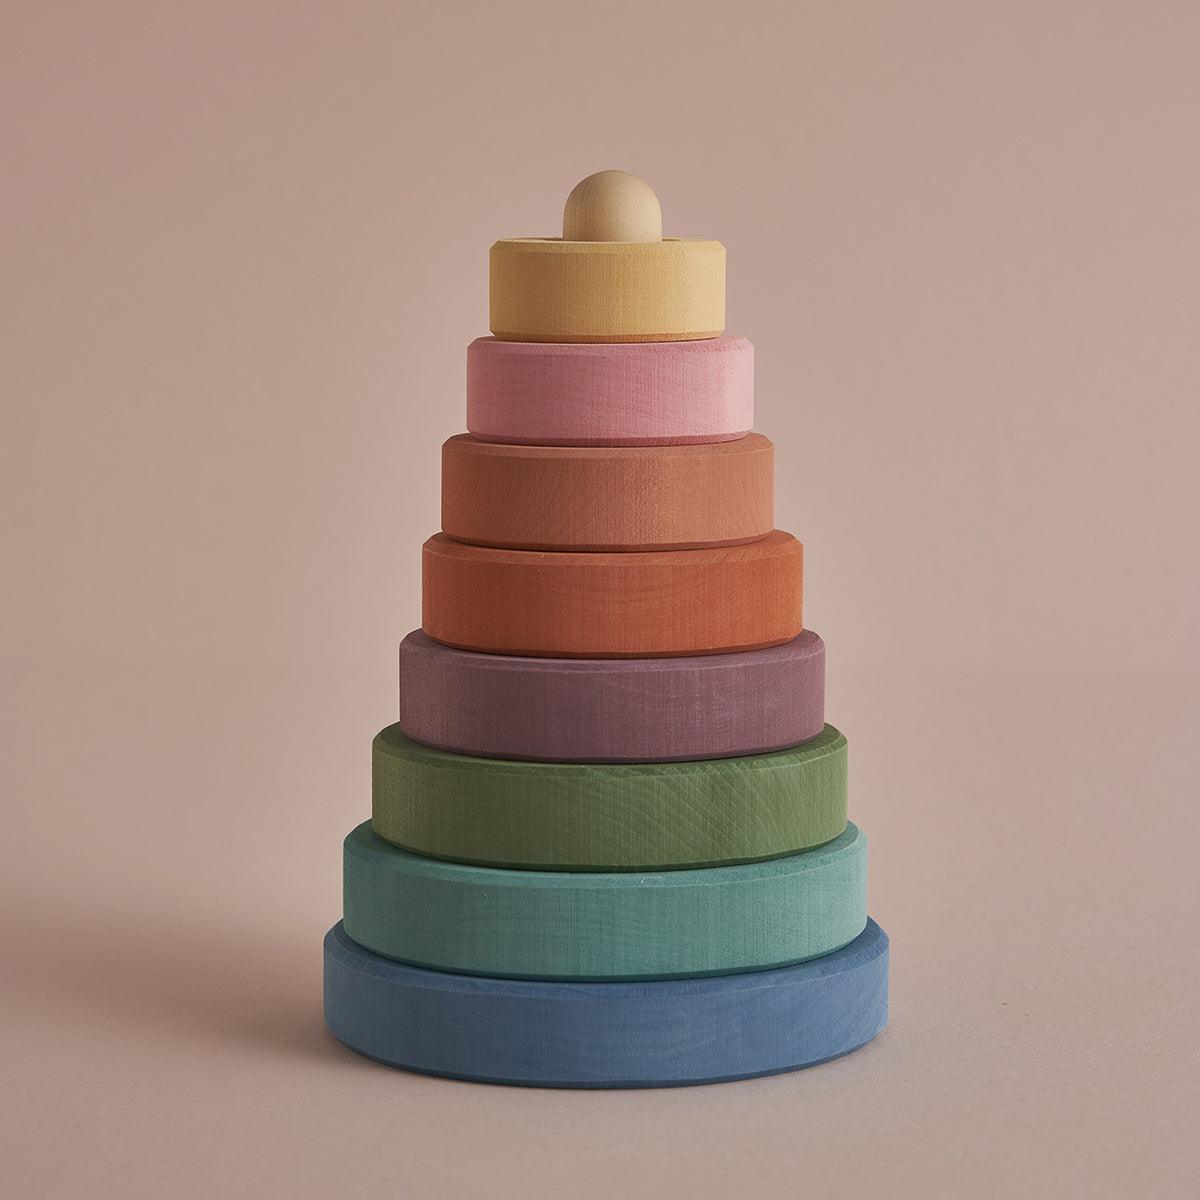 Pastel Earth stacking tower - Raduga Grez - Why and Whale